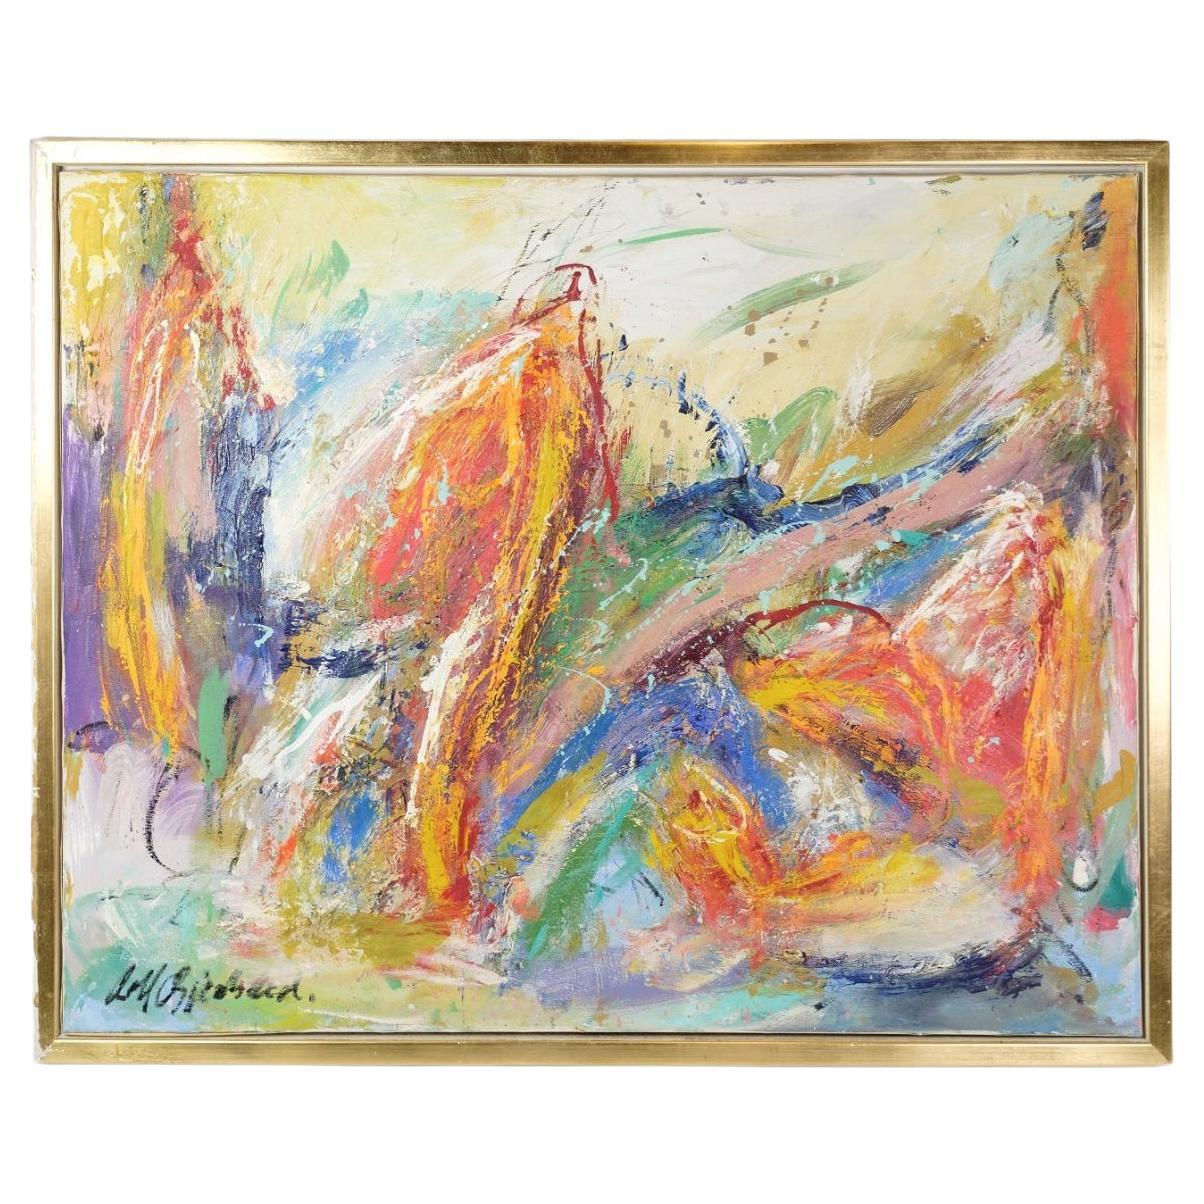 Colorful Oil Painting by the Artist Leif Bjerregaard "Where angels Dance" For Sale